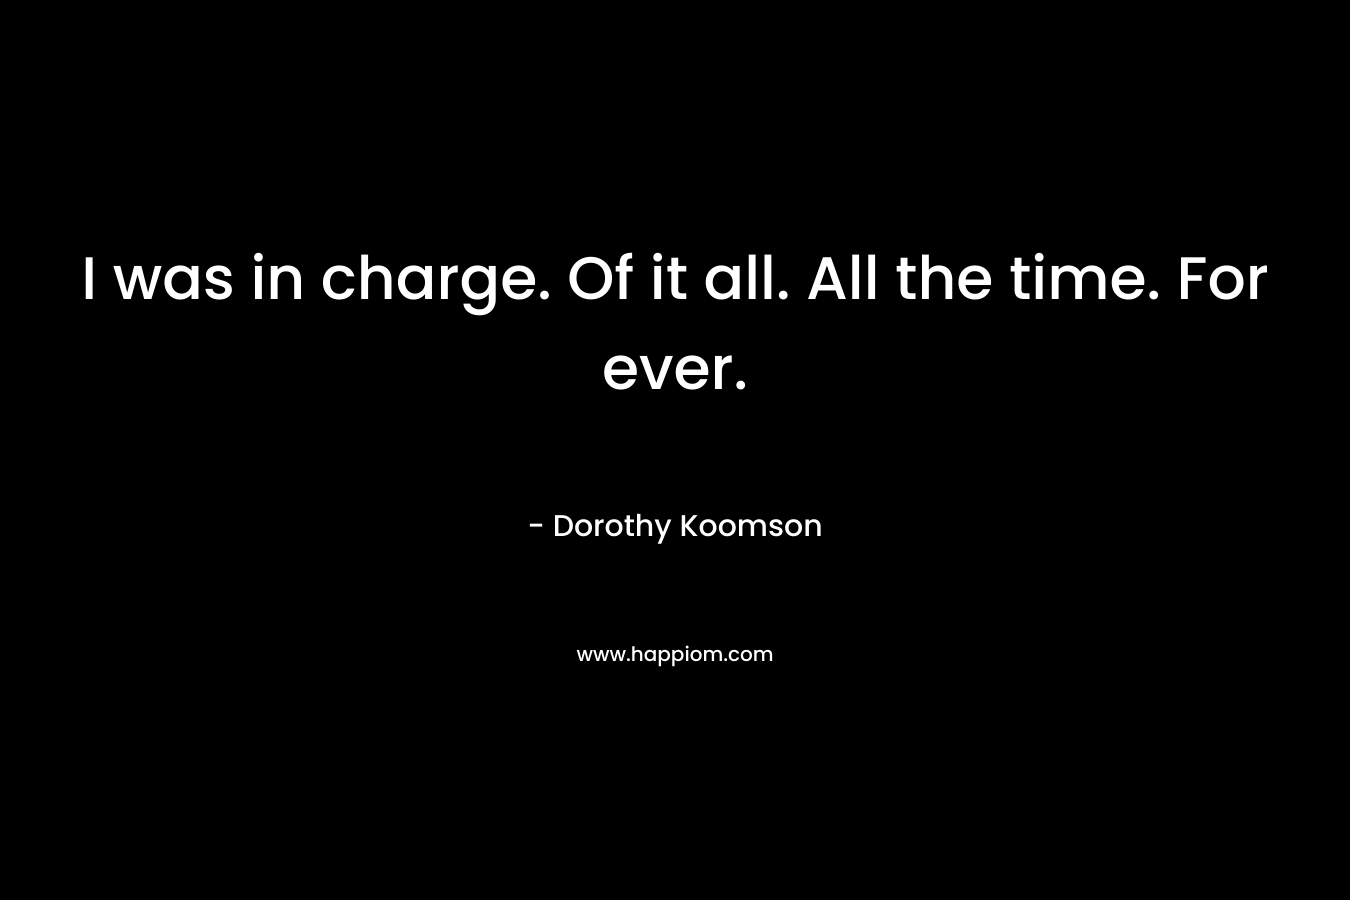 I was in charge. Of it all. All the time. For ever. – Dorothy Koomson